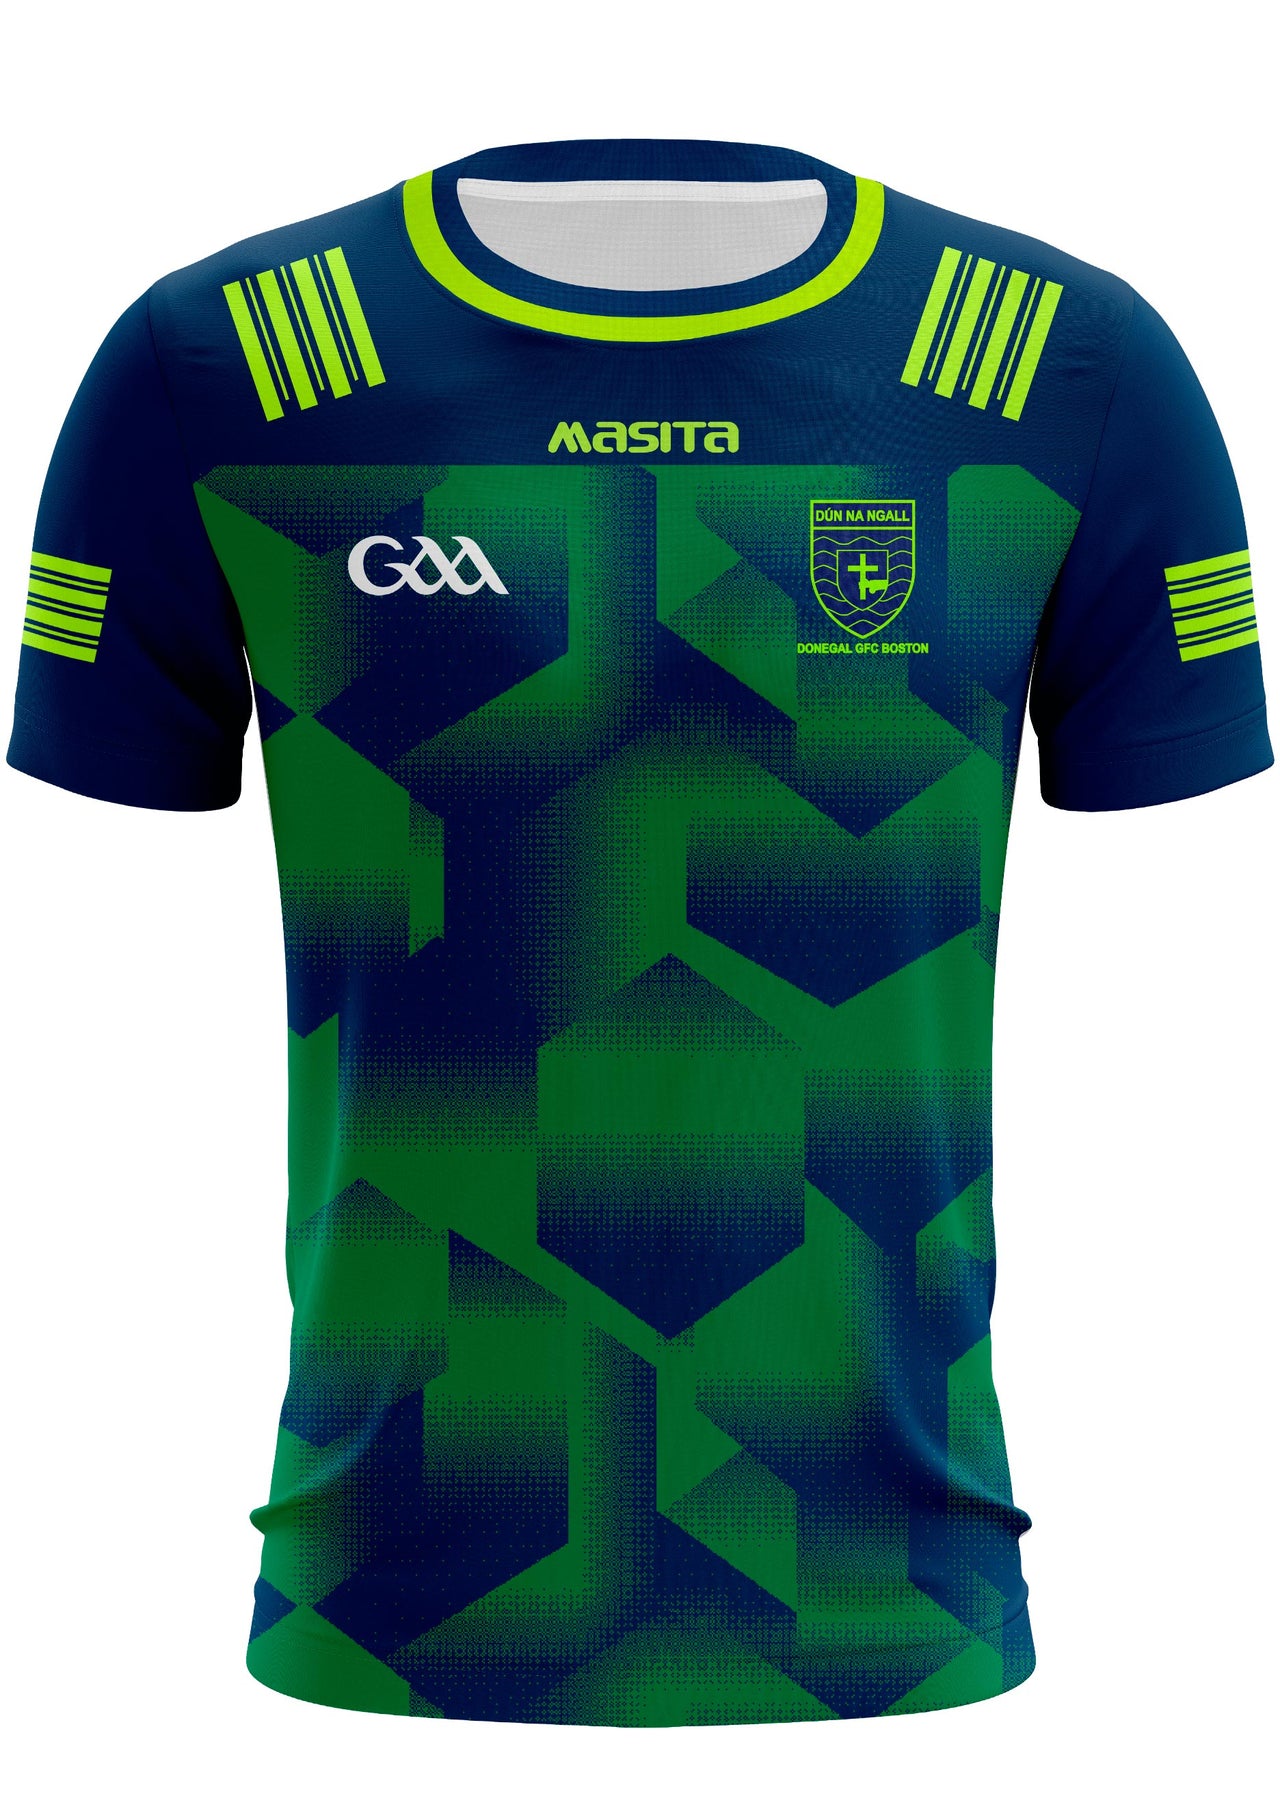 Donegal Boston Training Jersey Player Fit Adult